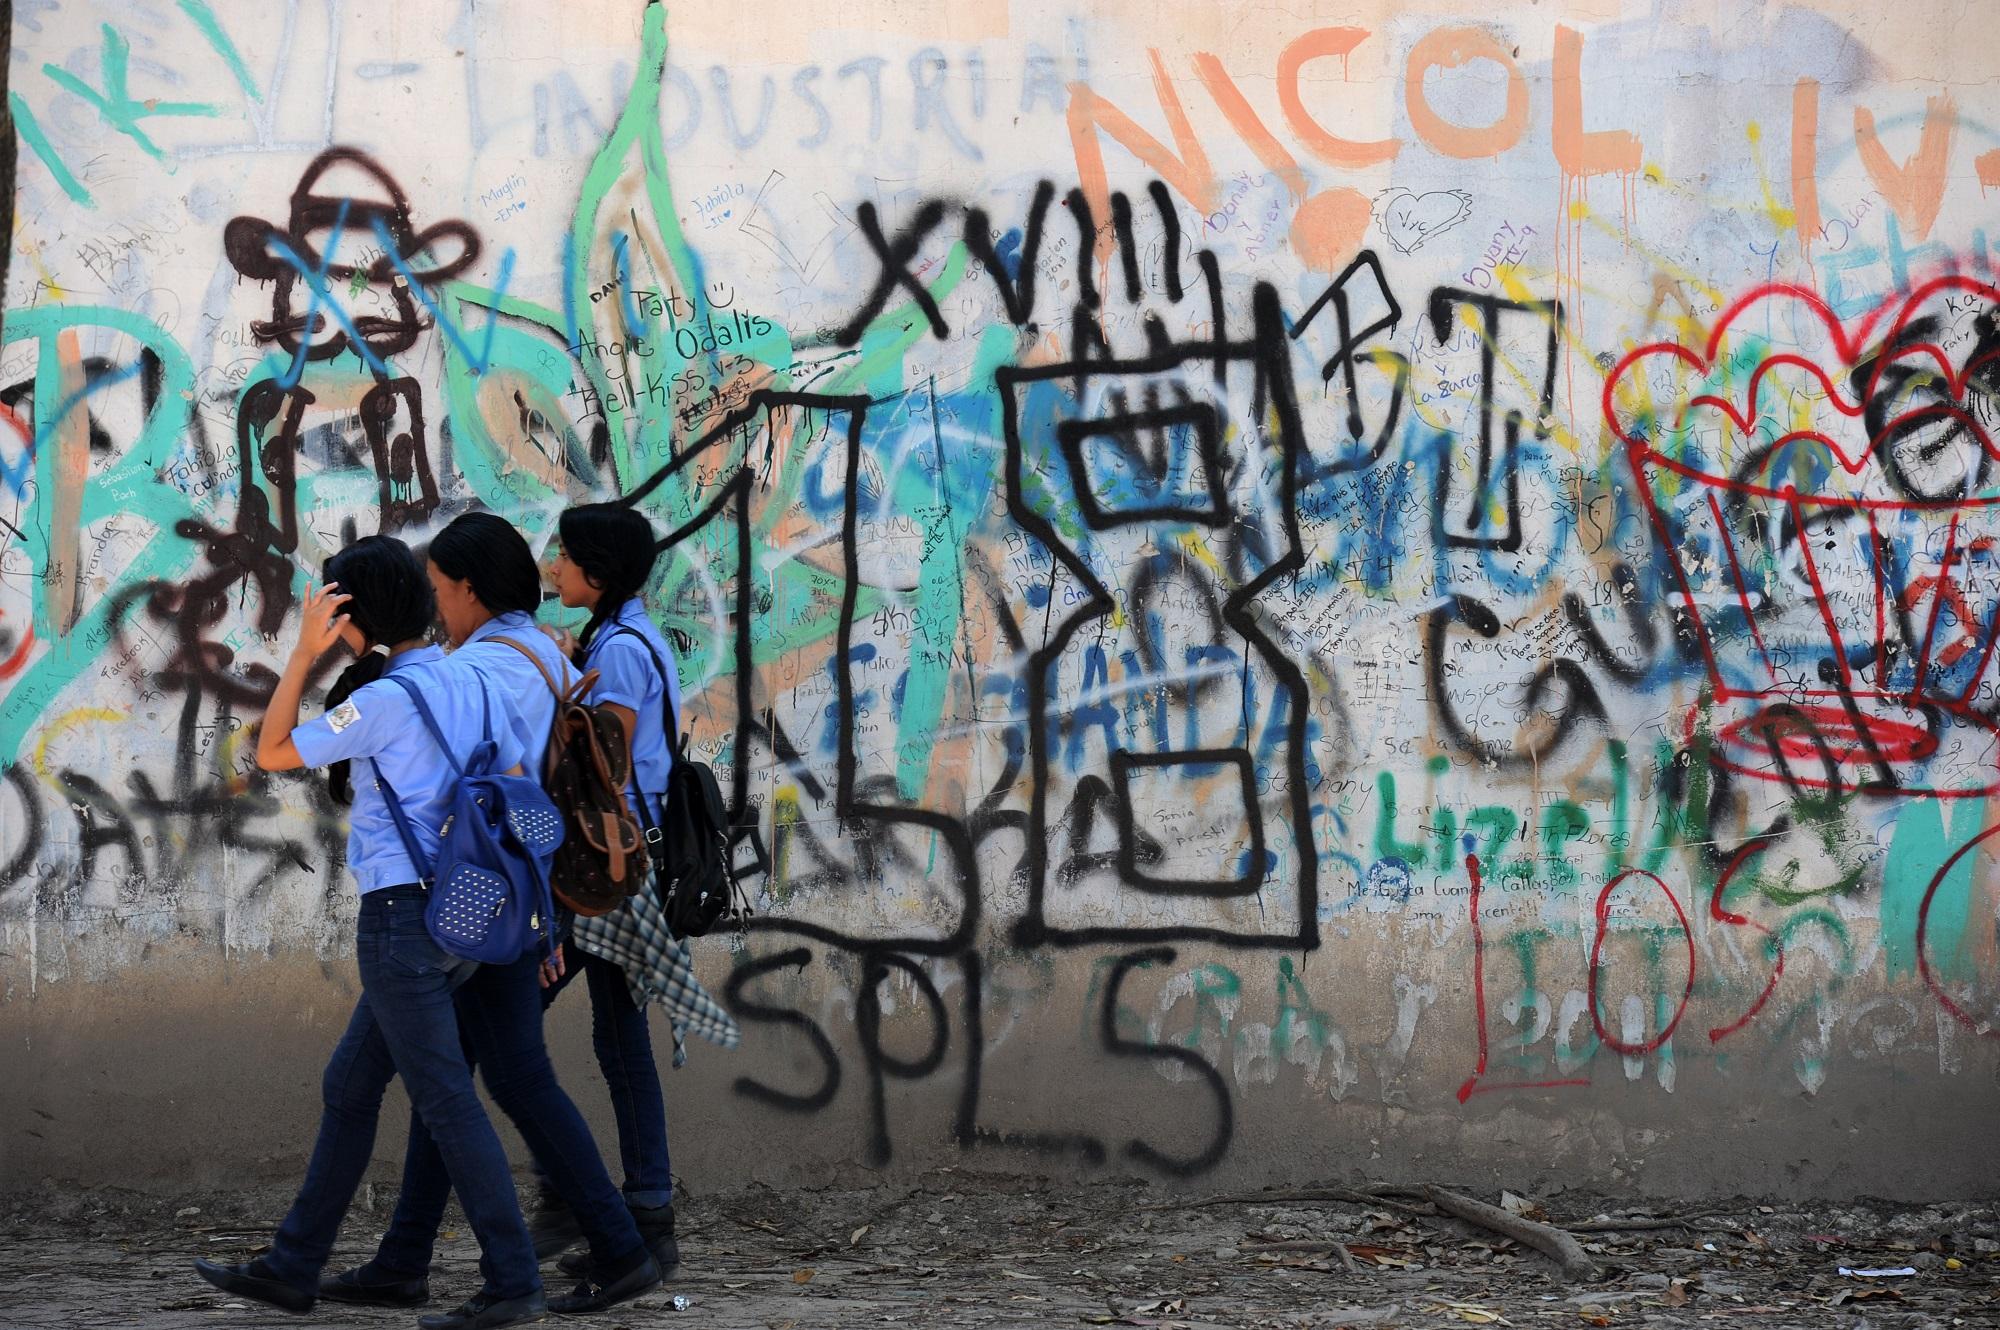 Students await to take classes at the Instituto Saul Zelaya high school in Tegucigalpa, on April 27, 2016. The Instituto Zelaya is under the control of the Mara 18 juvenile gang. Both the Mara 18 and the Mara Salvatrucha (MS-19) gangs try to recruit students in their intent to control the drug trafficking in Tegucigalpa. / AFP PHOTO / ORLANDO SIERRA